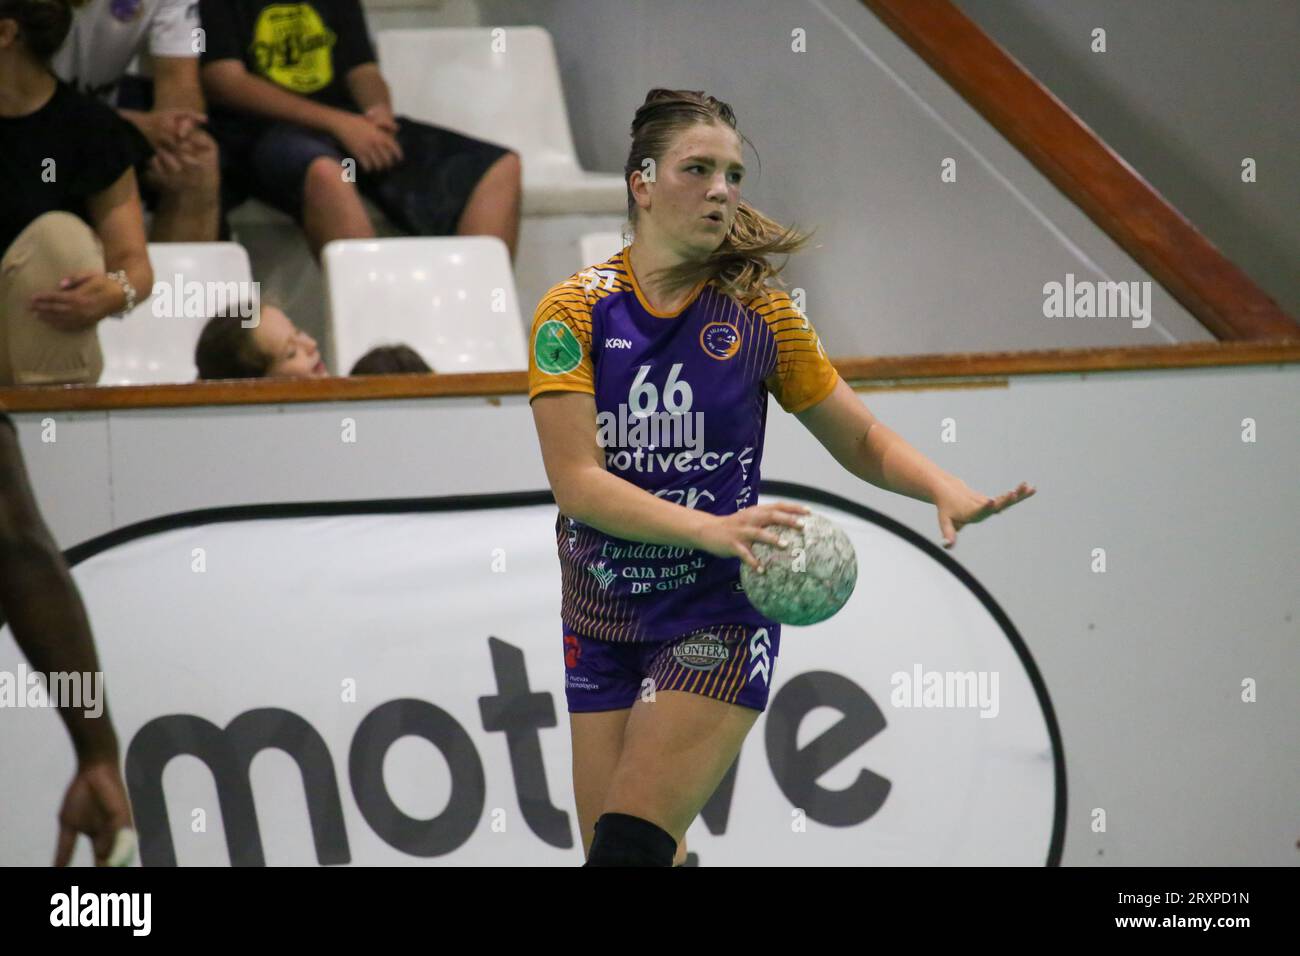 Gijon, Spain, 26th September, 2023: The player of Motive.co Gijon Balonmano La Calzada, Dorottya Margit Zentai (66) with the ball during the 8th Matchday of the Liga Guerreras Iberdrola 2023-24 between Motive.co Gijon Balonmano La Calzada and the Super Amara Bera Bera, on September 26, 2023, at the La Arena Sports Pavilion, in Gijón, Spain. Credit: Alberto Brevers / Alamy Live News. Stock Photo